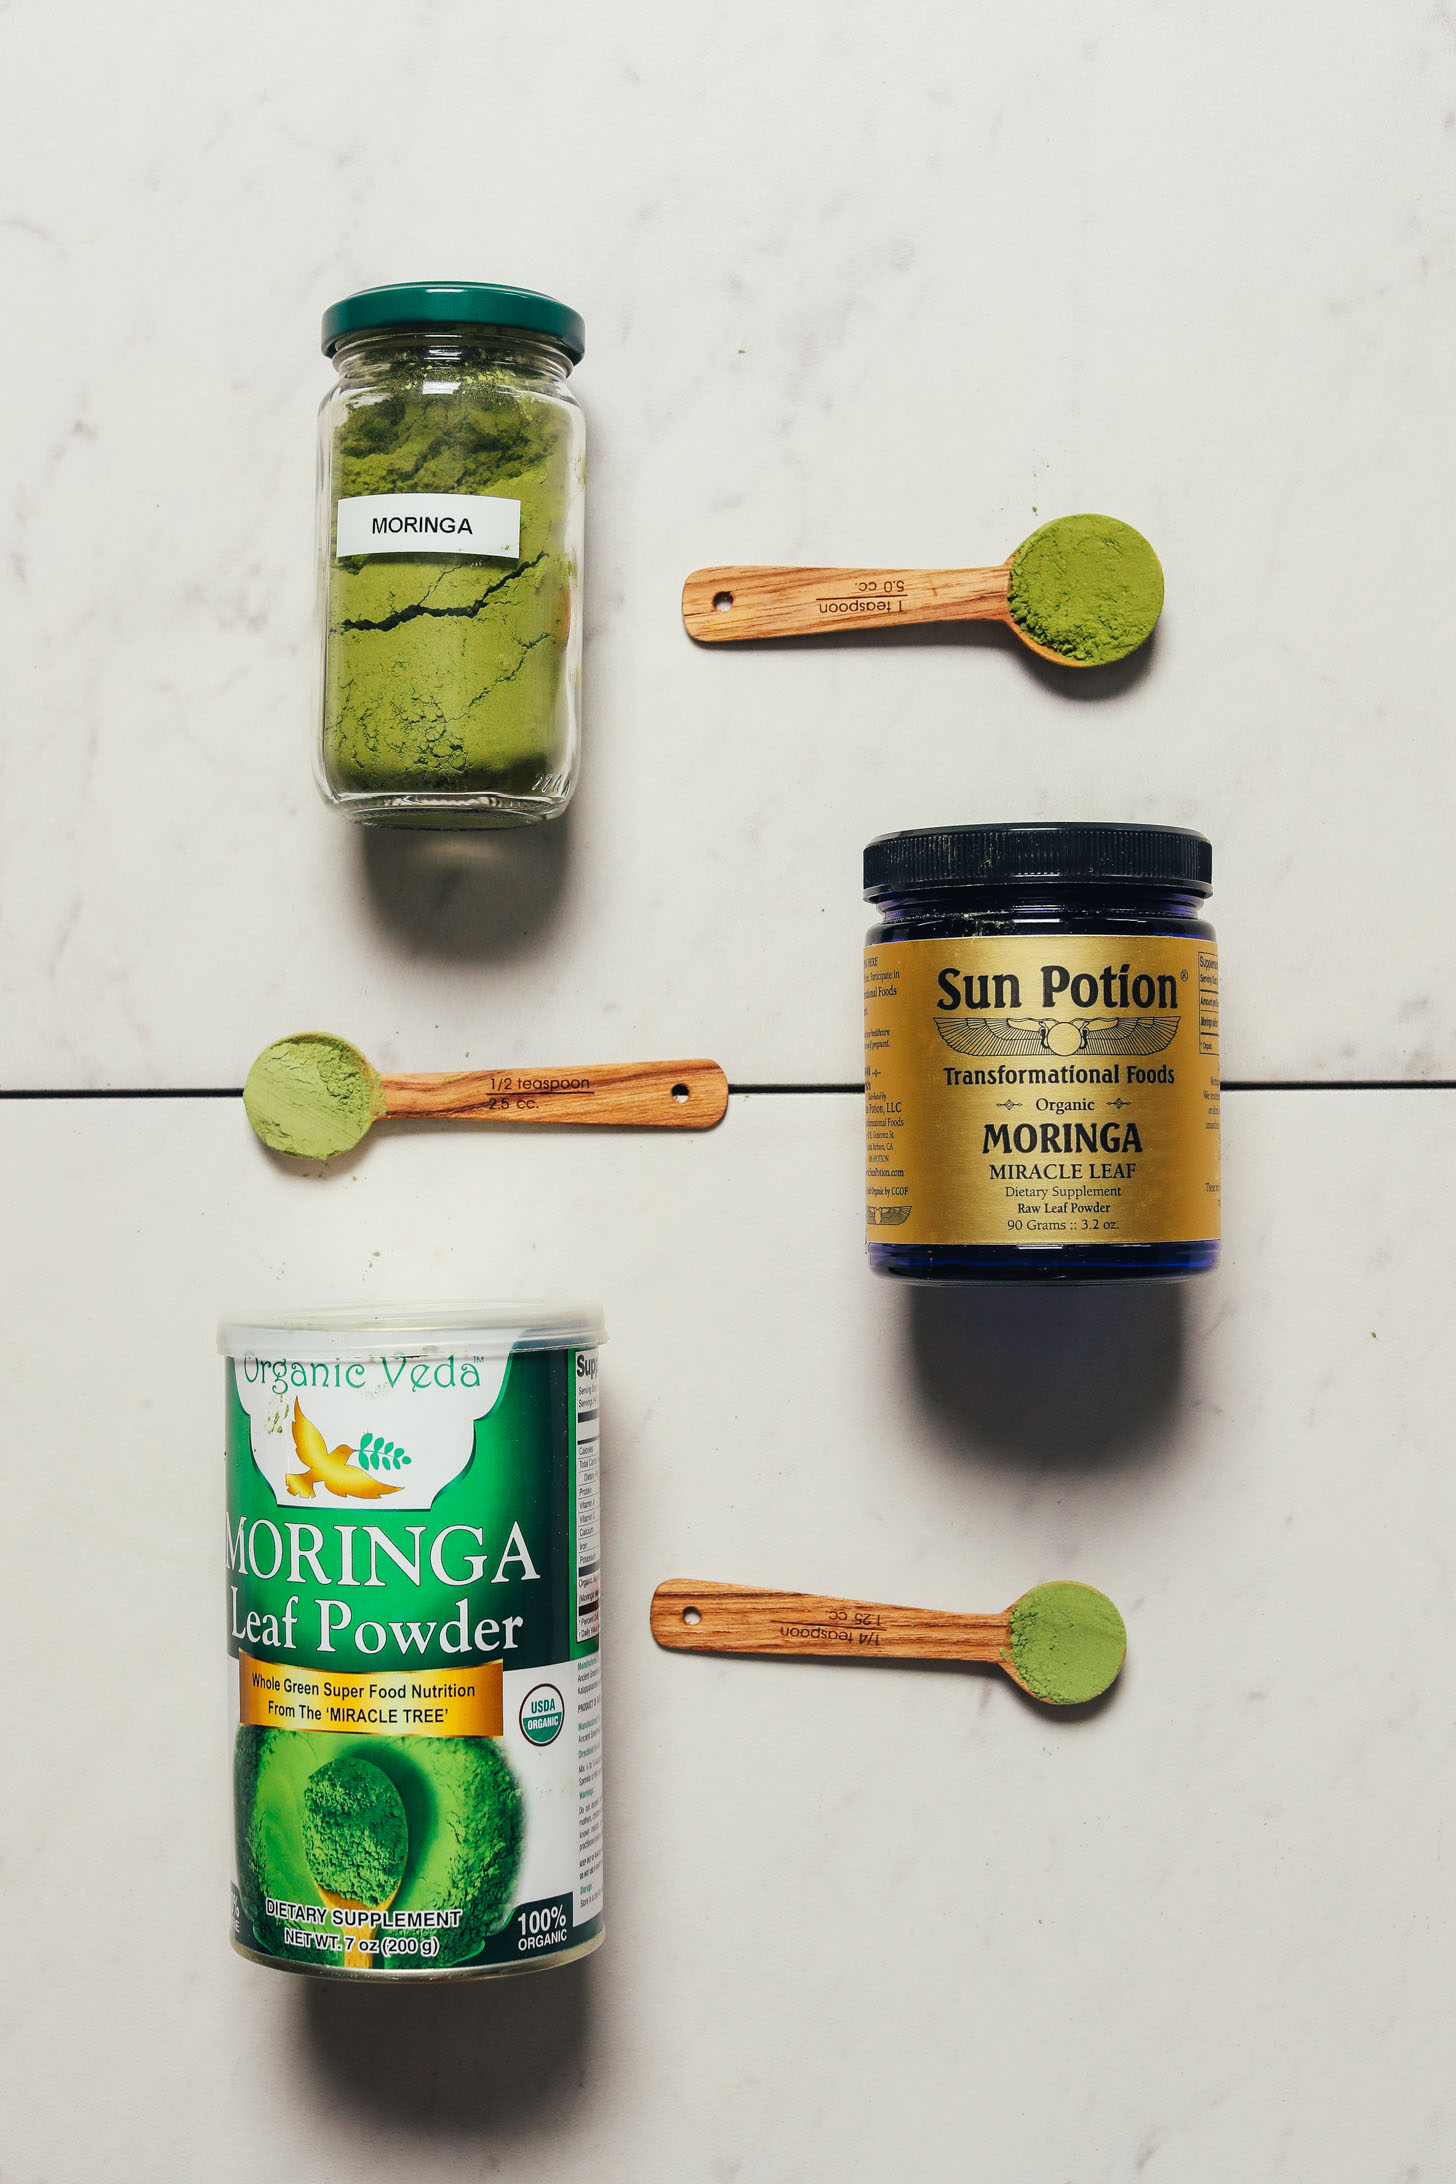 Three jars of moringa for our review of the best brands of moringa powder